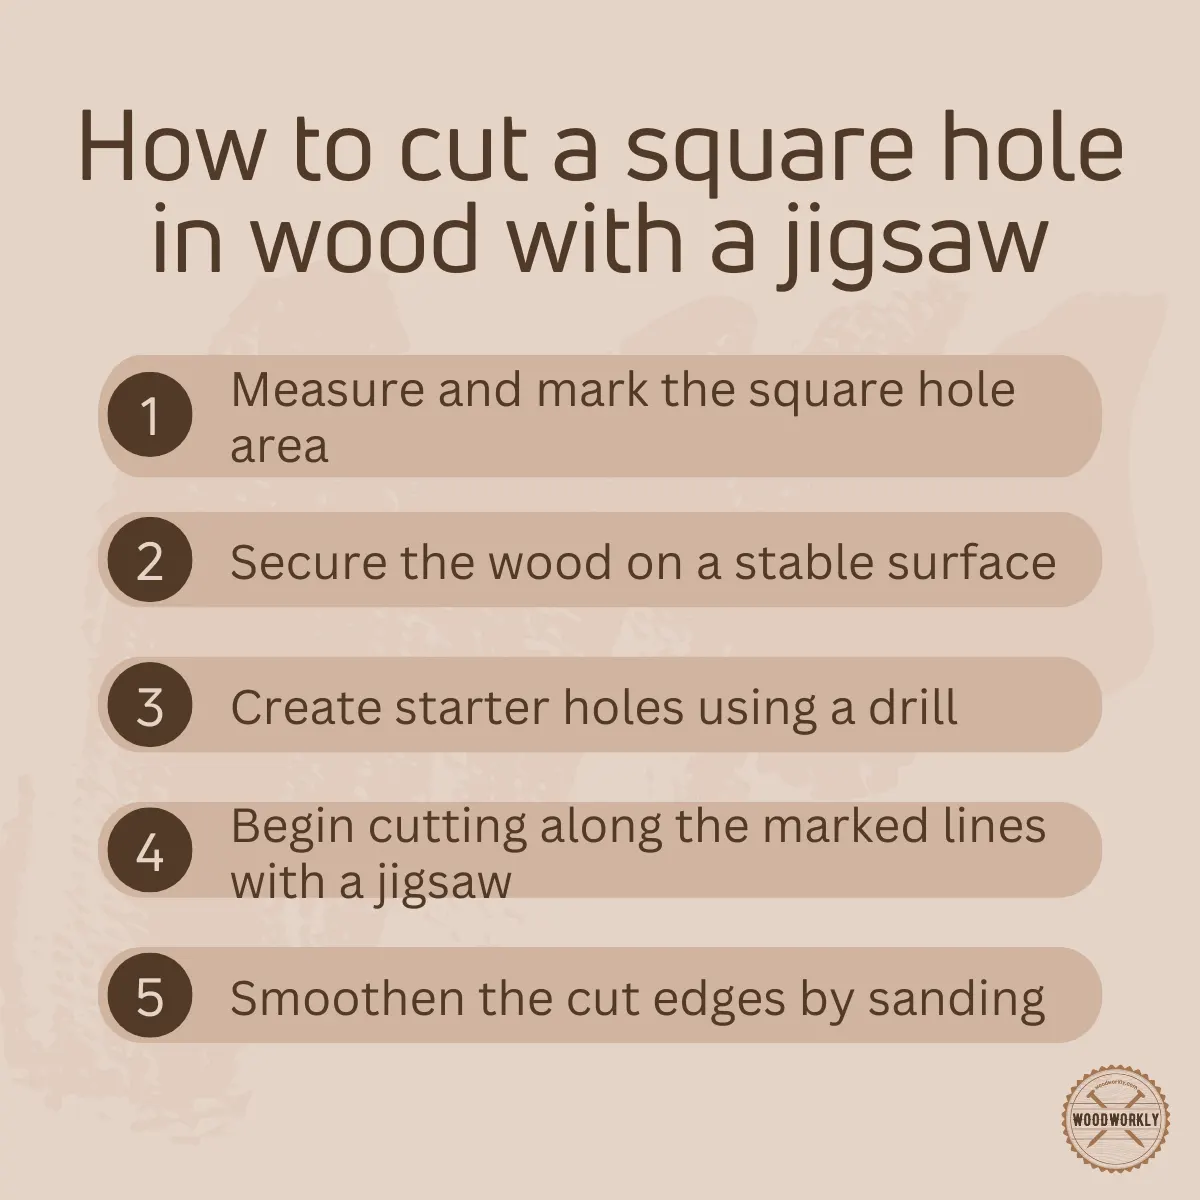 How to cut a square hole in wood with a jigsaw